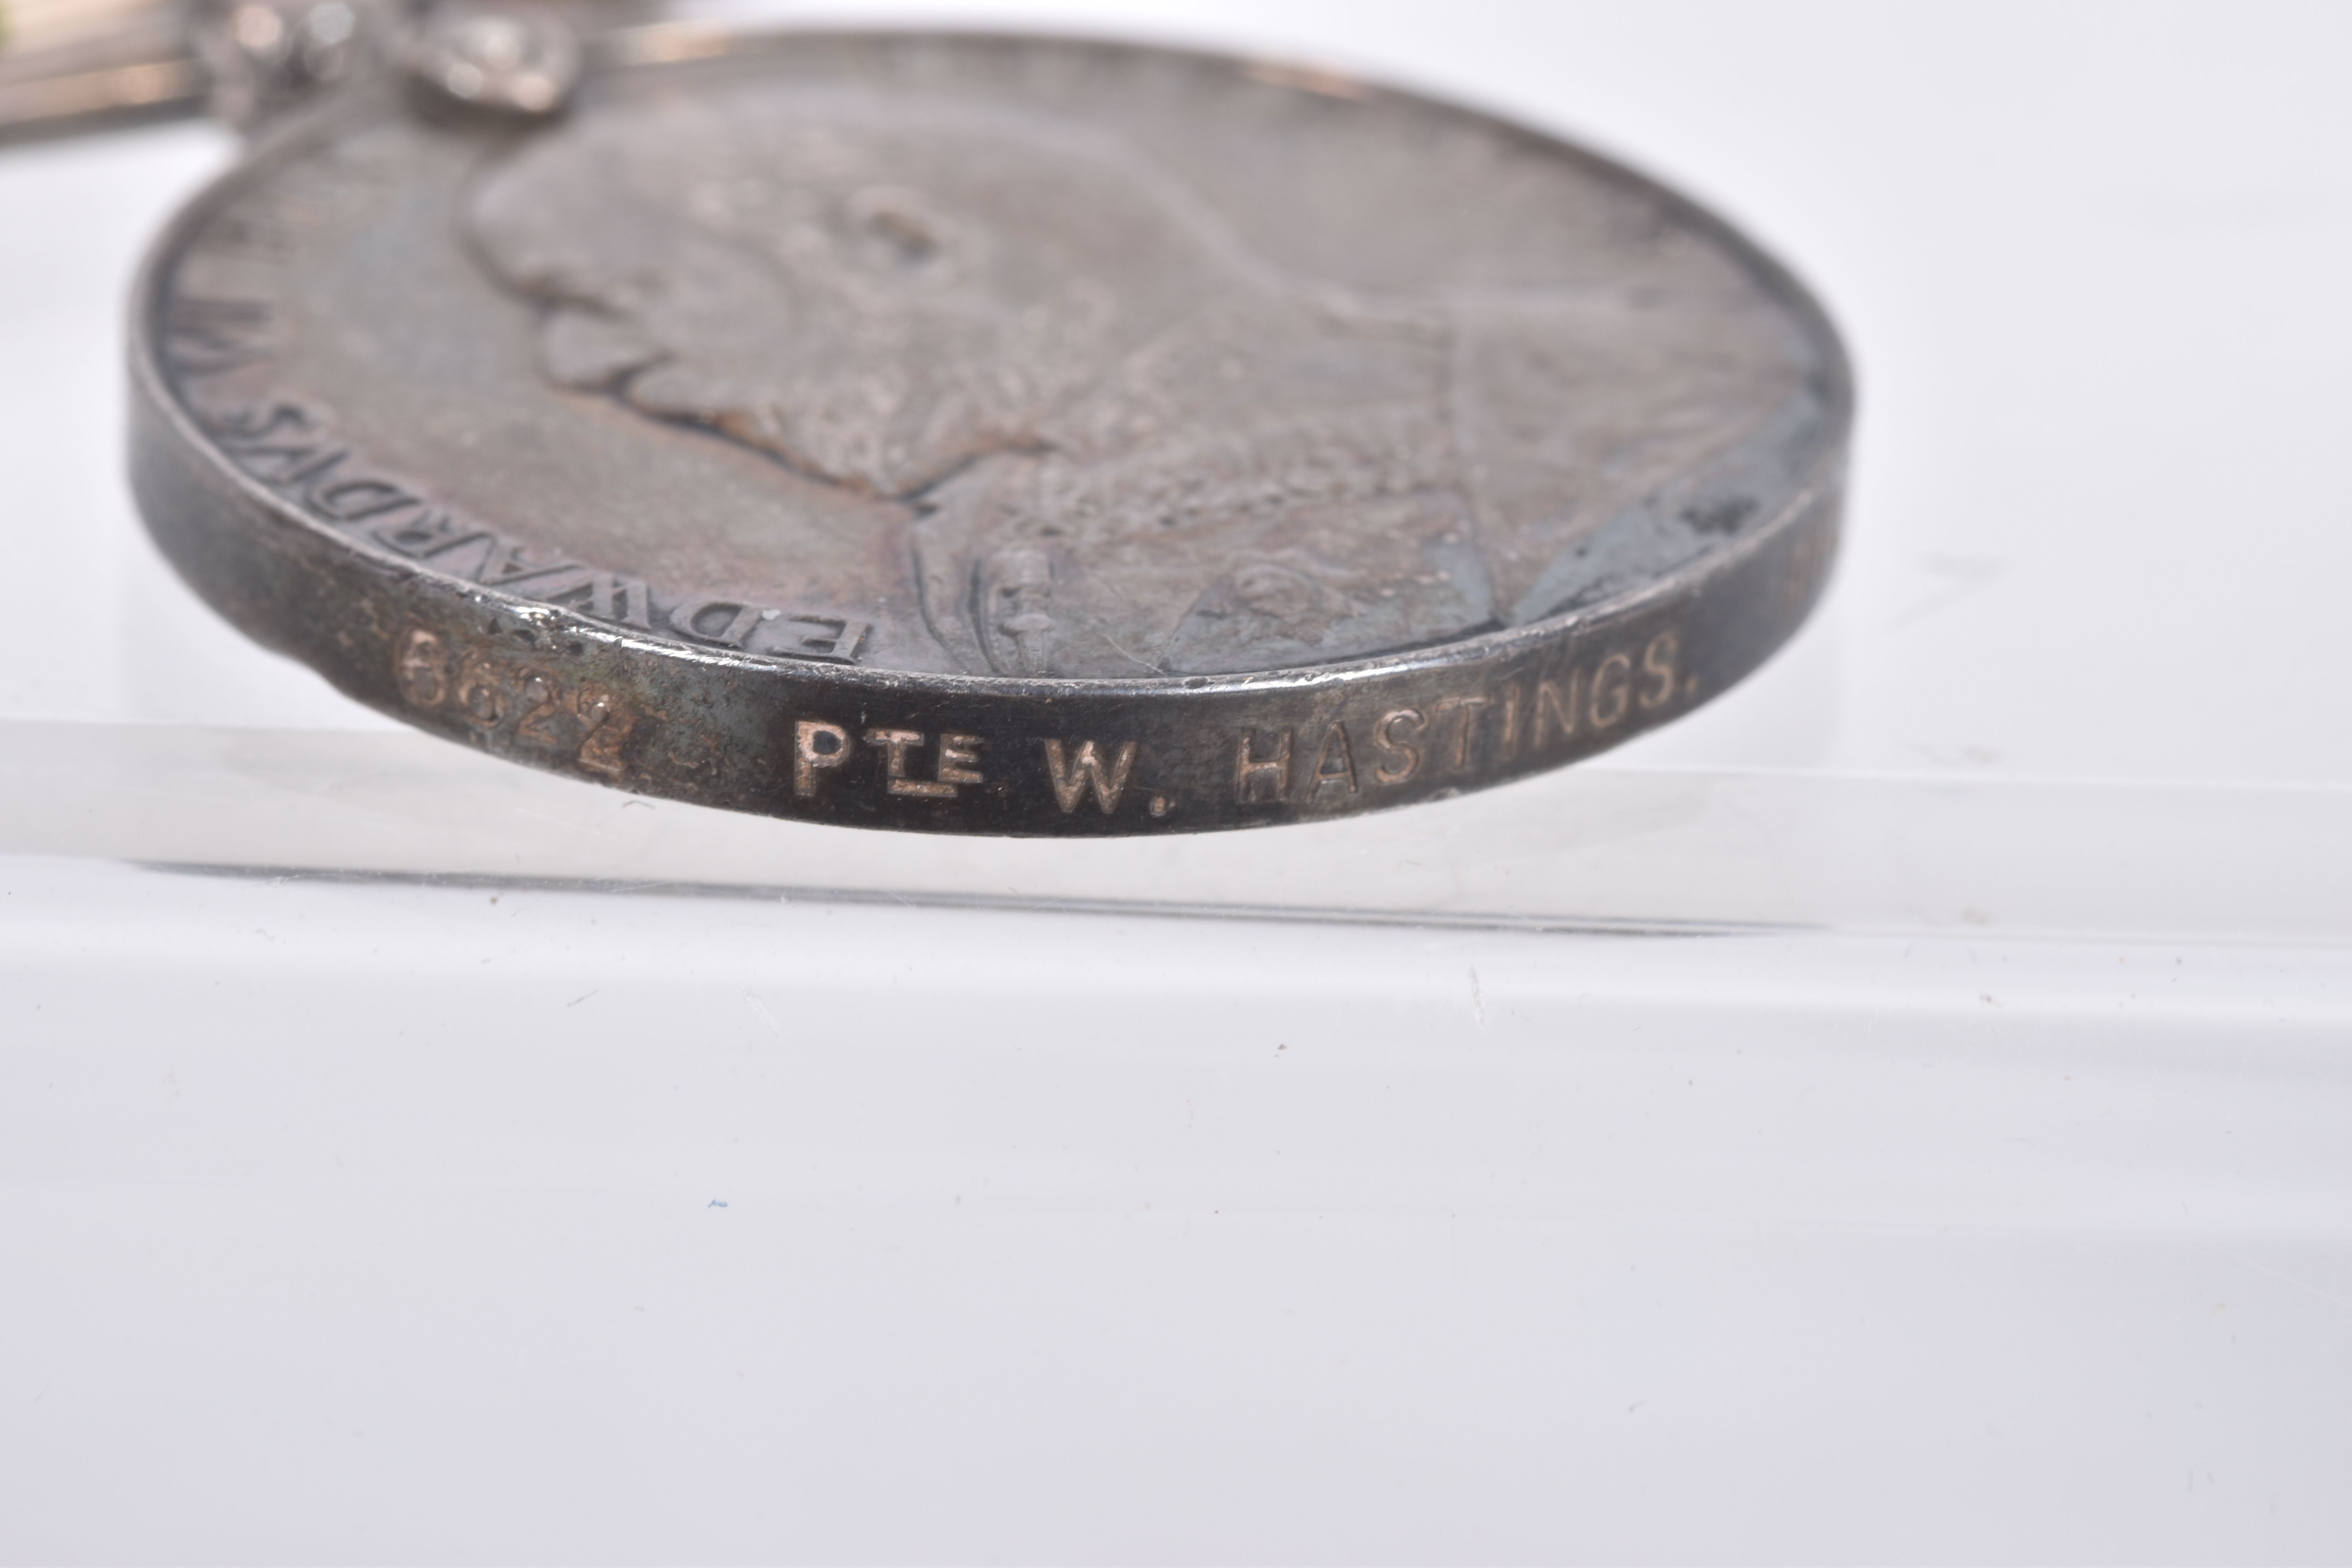 A BOERWAR AND WWI GROUP OF MEDALS, the QSA and KSA are both correctly named to 6622 PTE W HASTINGS - Image 9 of 25